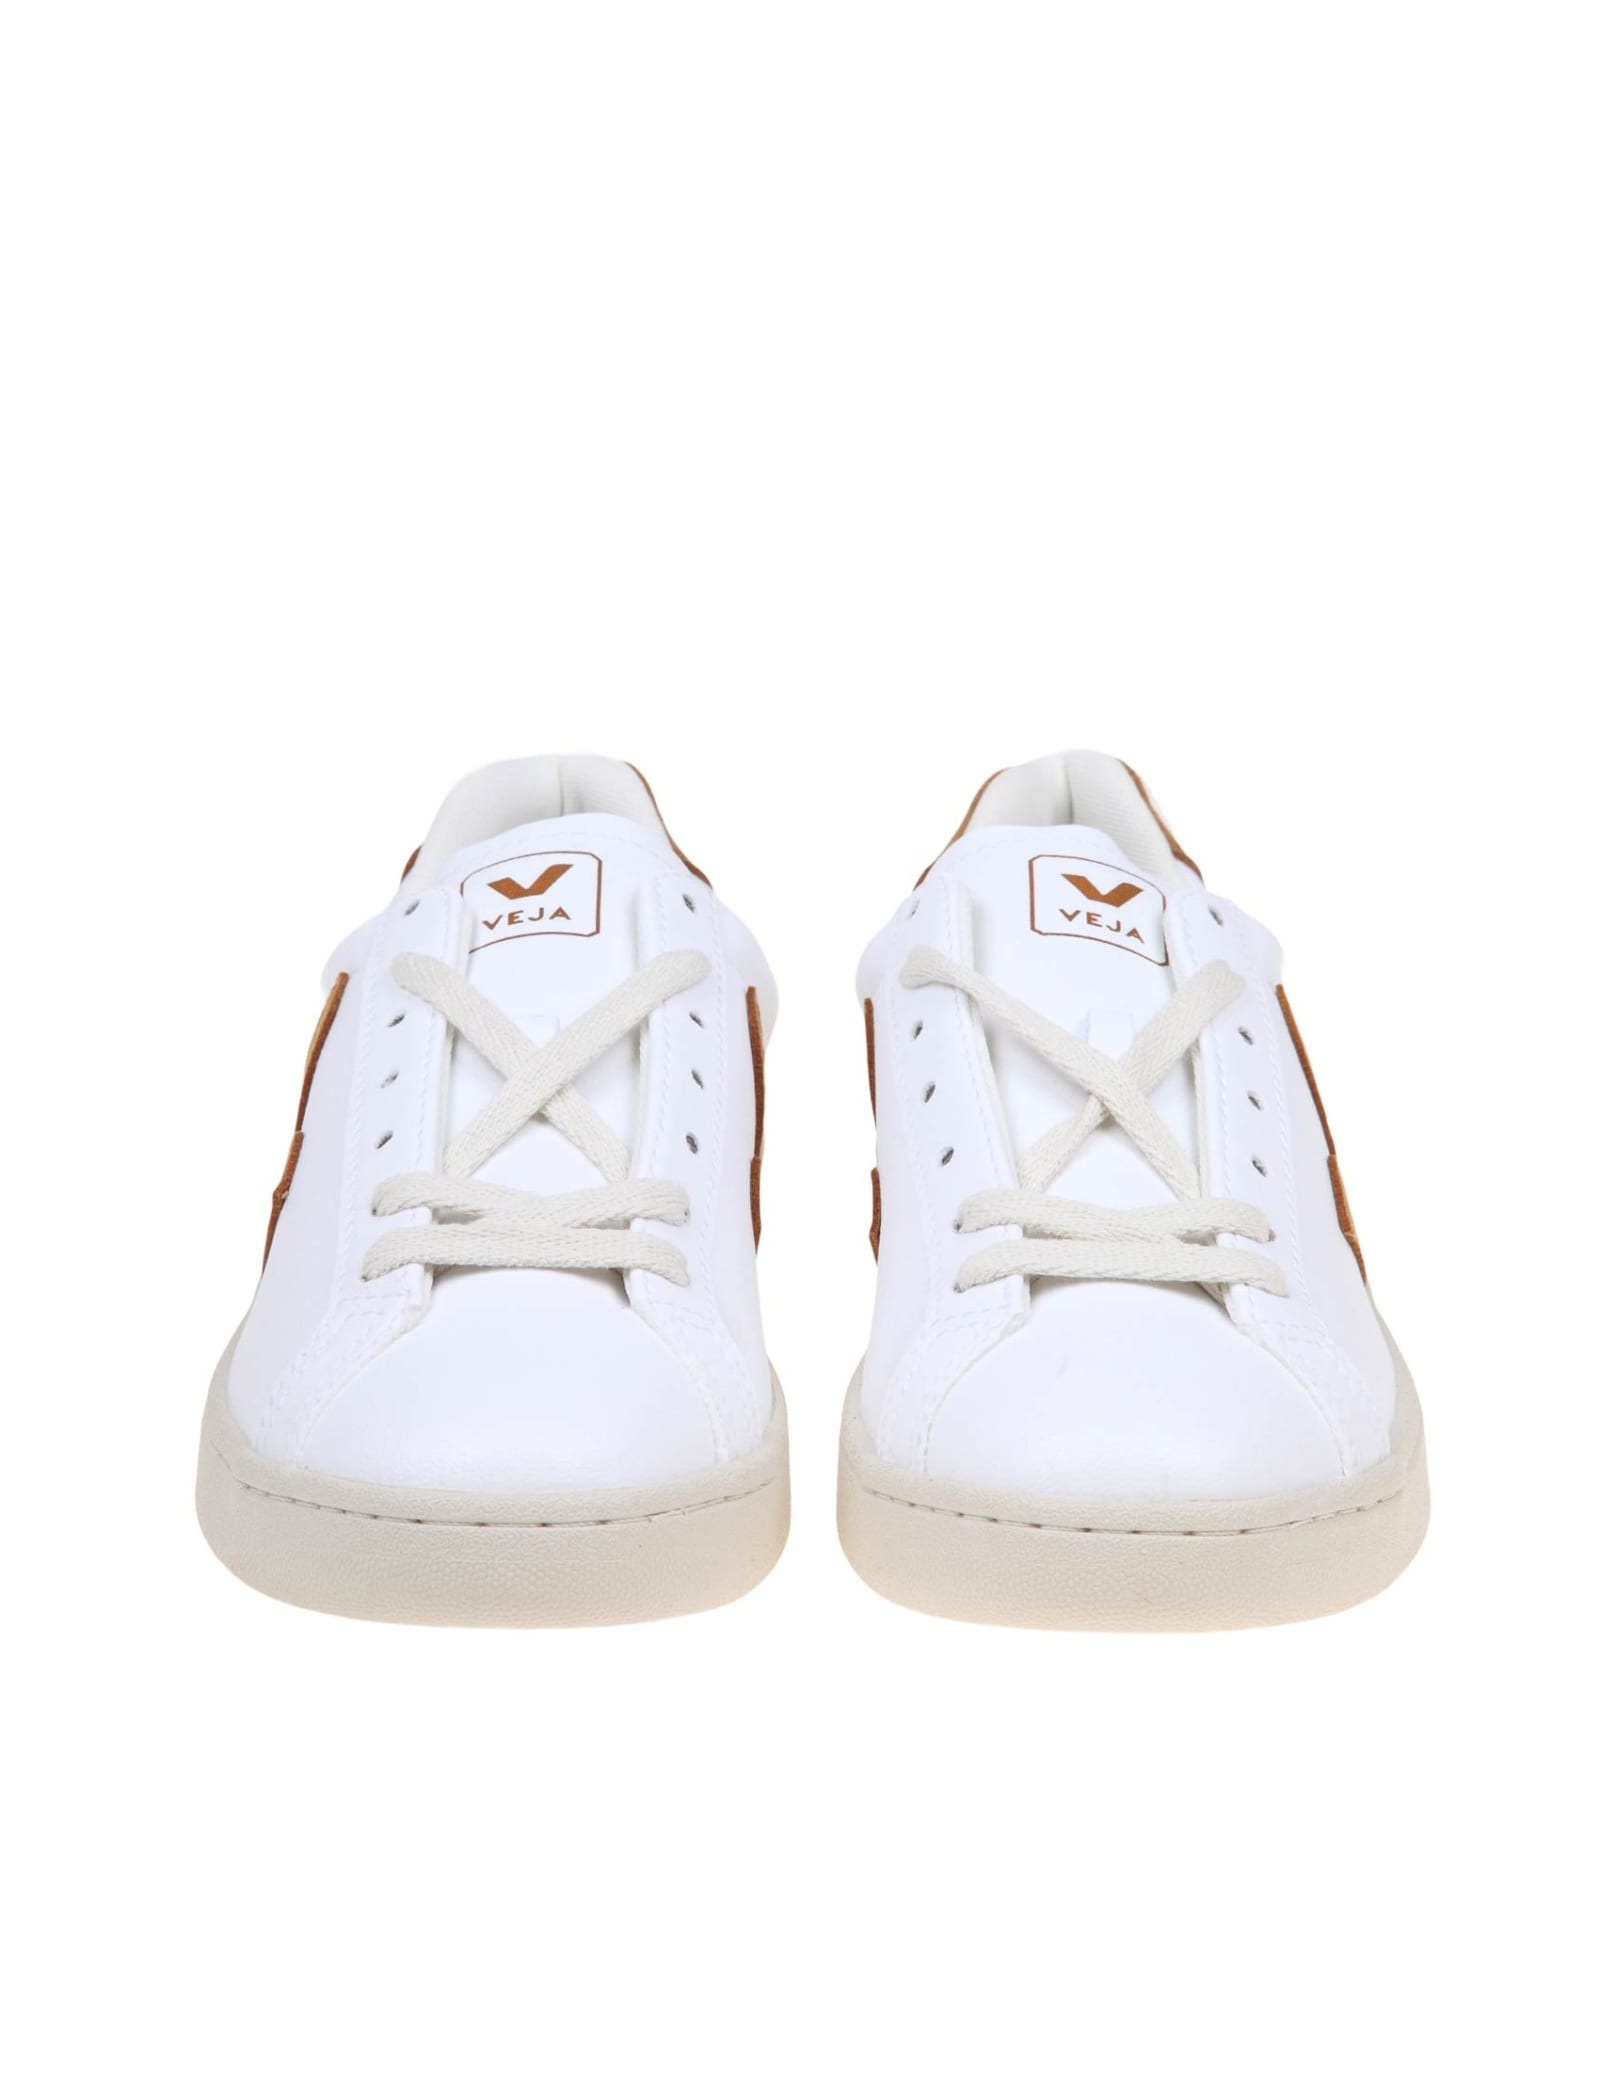 Shop Veja Urca Sneakers In White Coated Cotton In White/camel